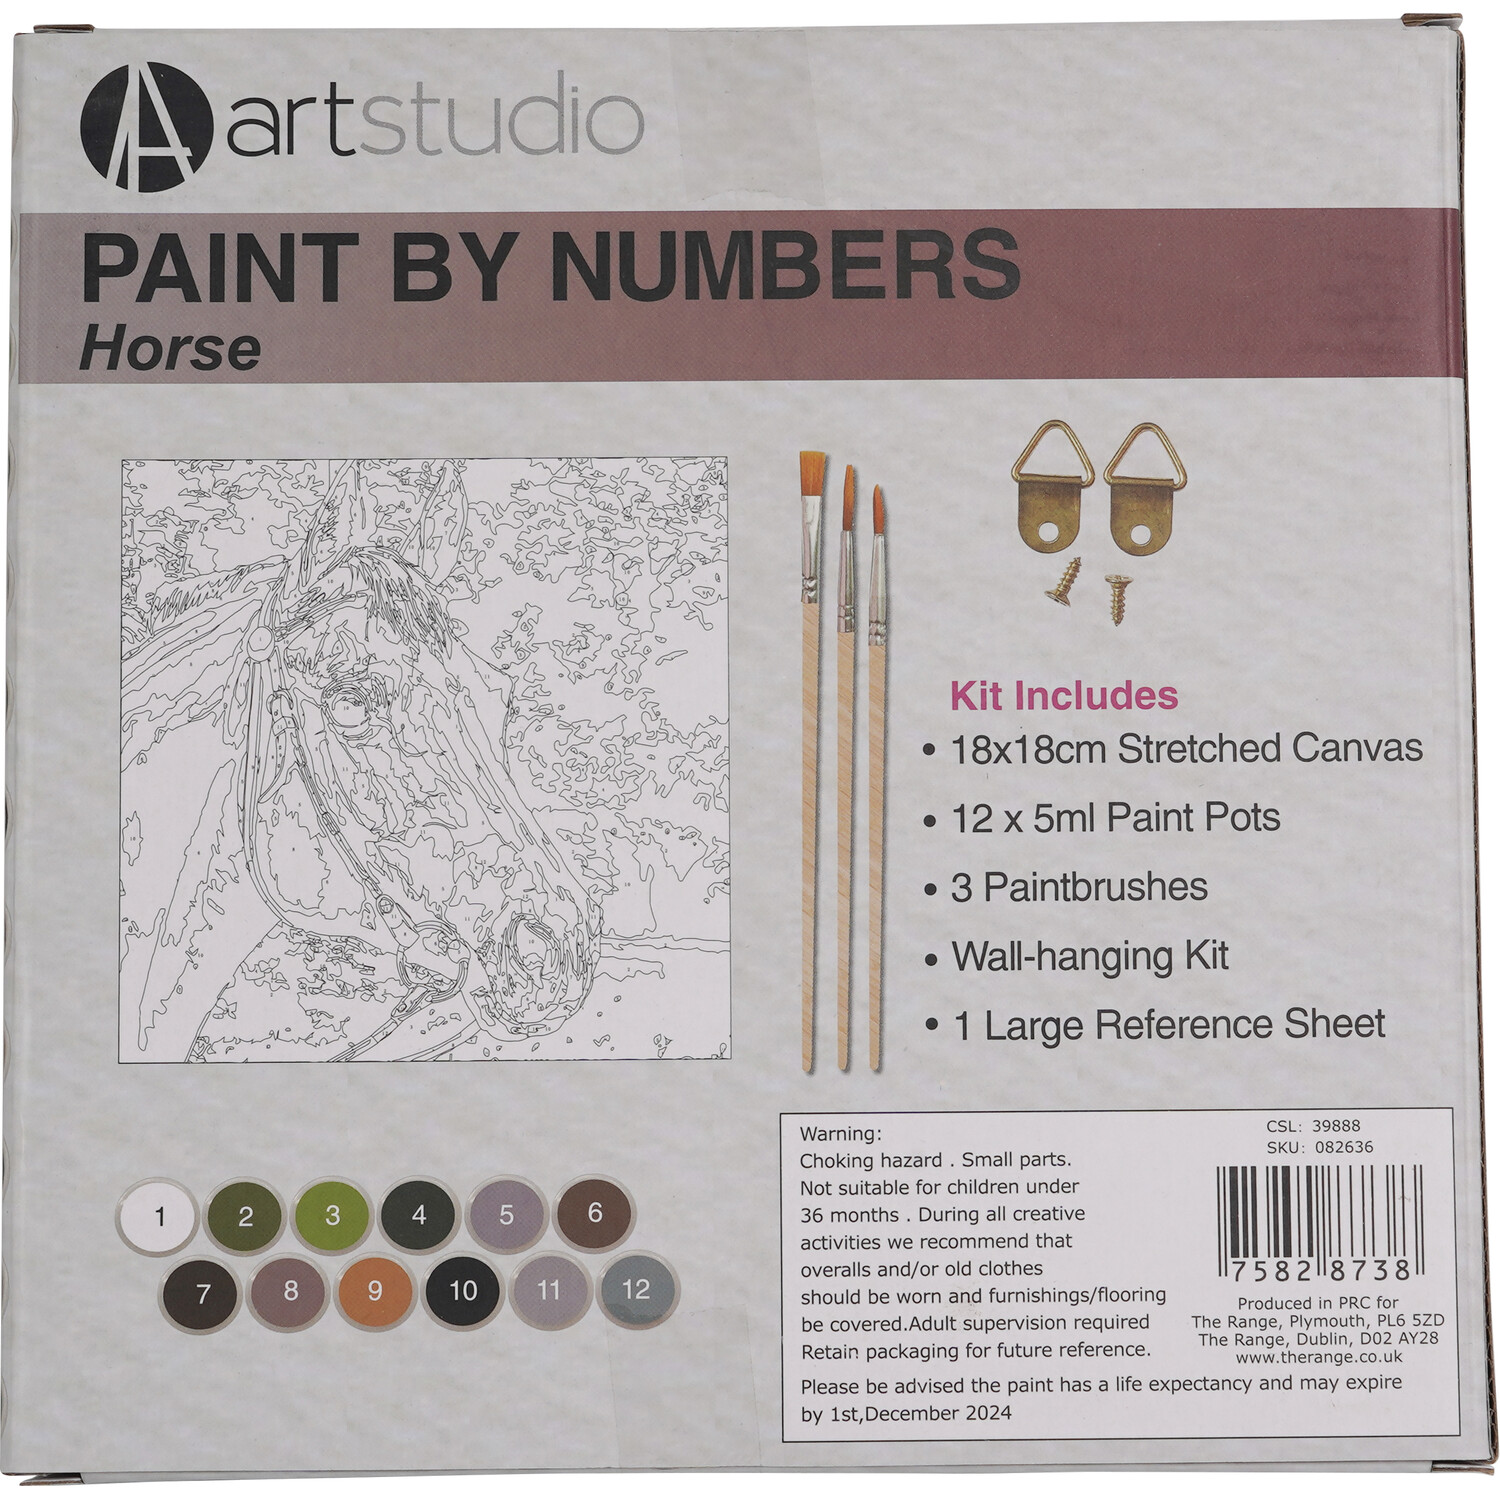 Art Studio Paint by Numbers - Horse Image 3